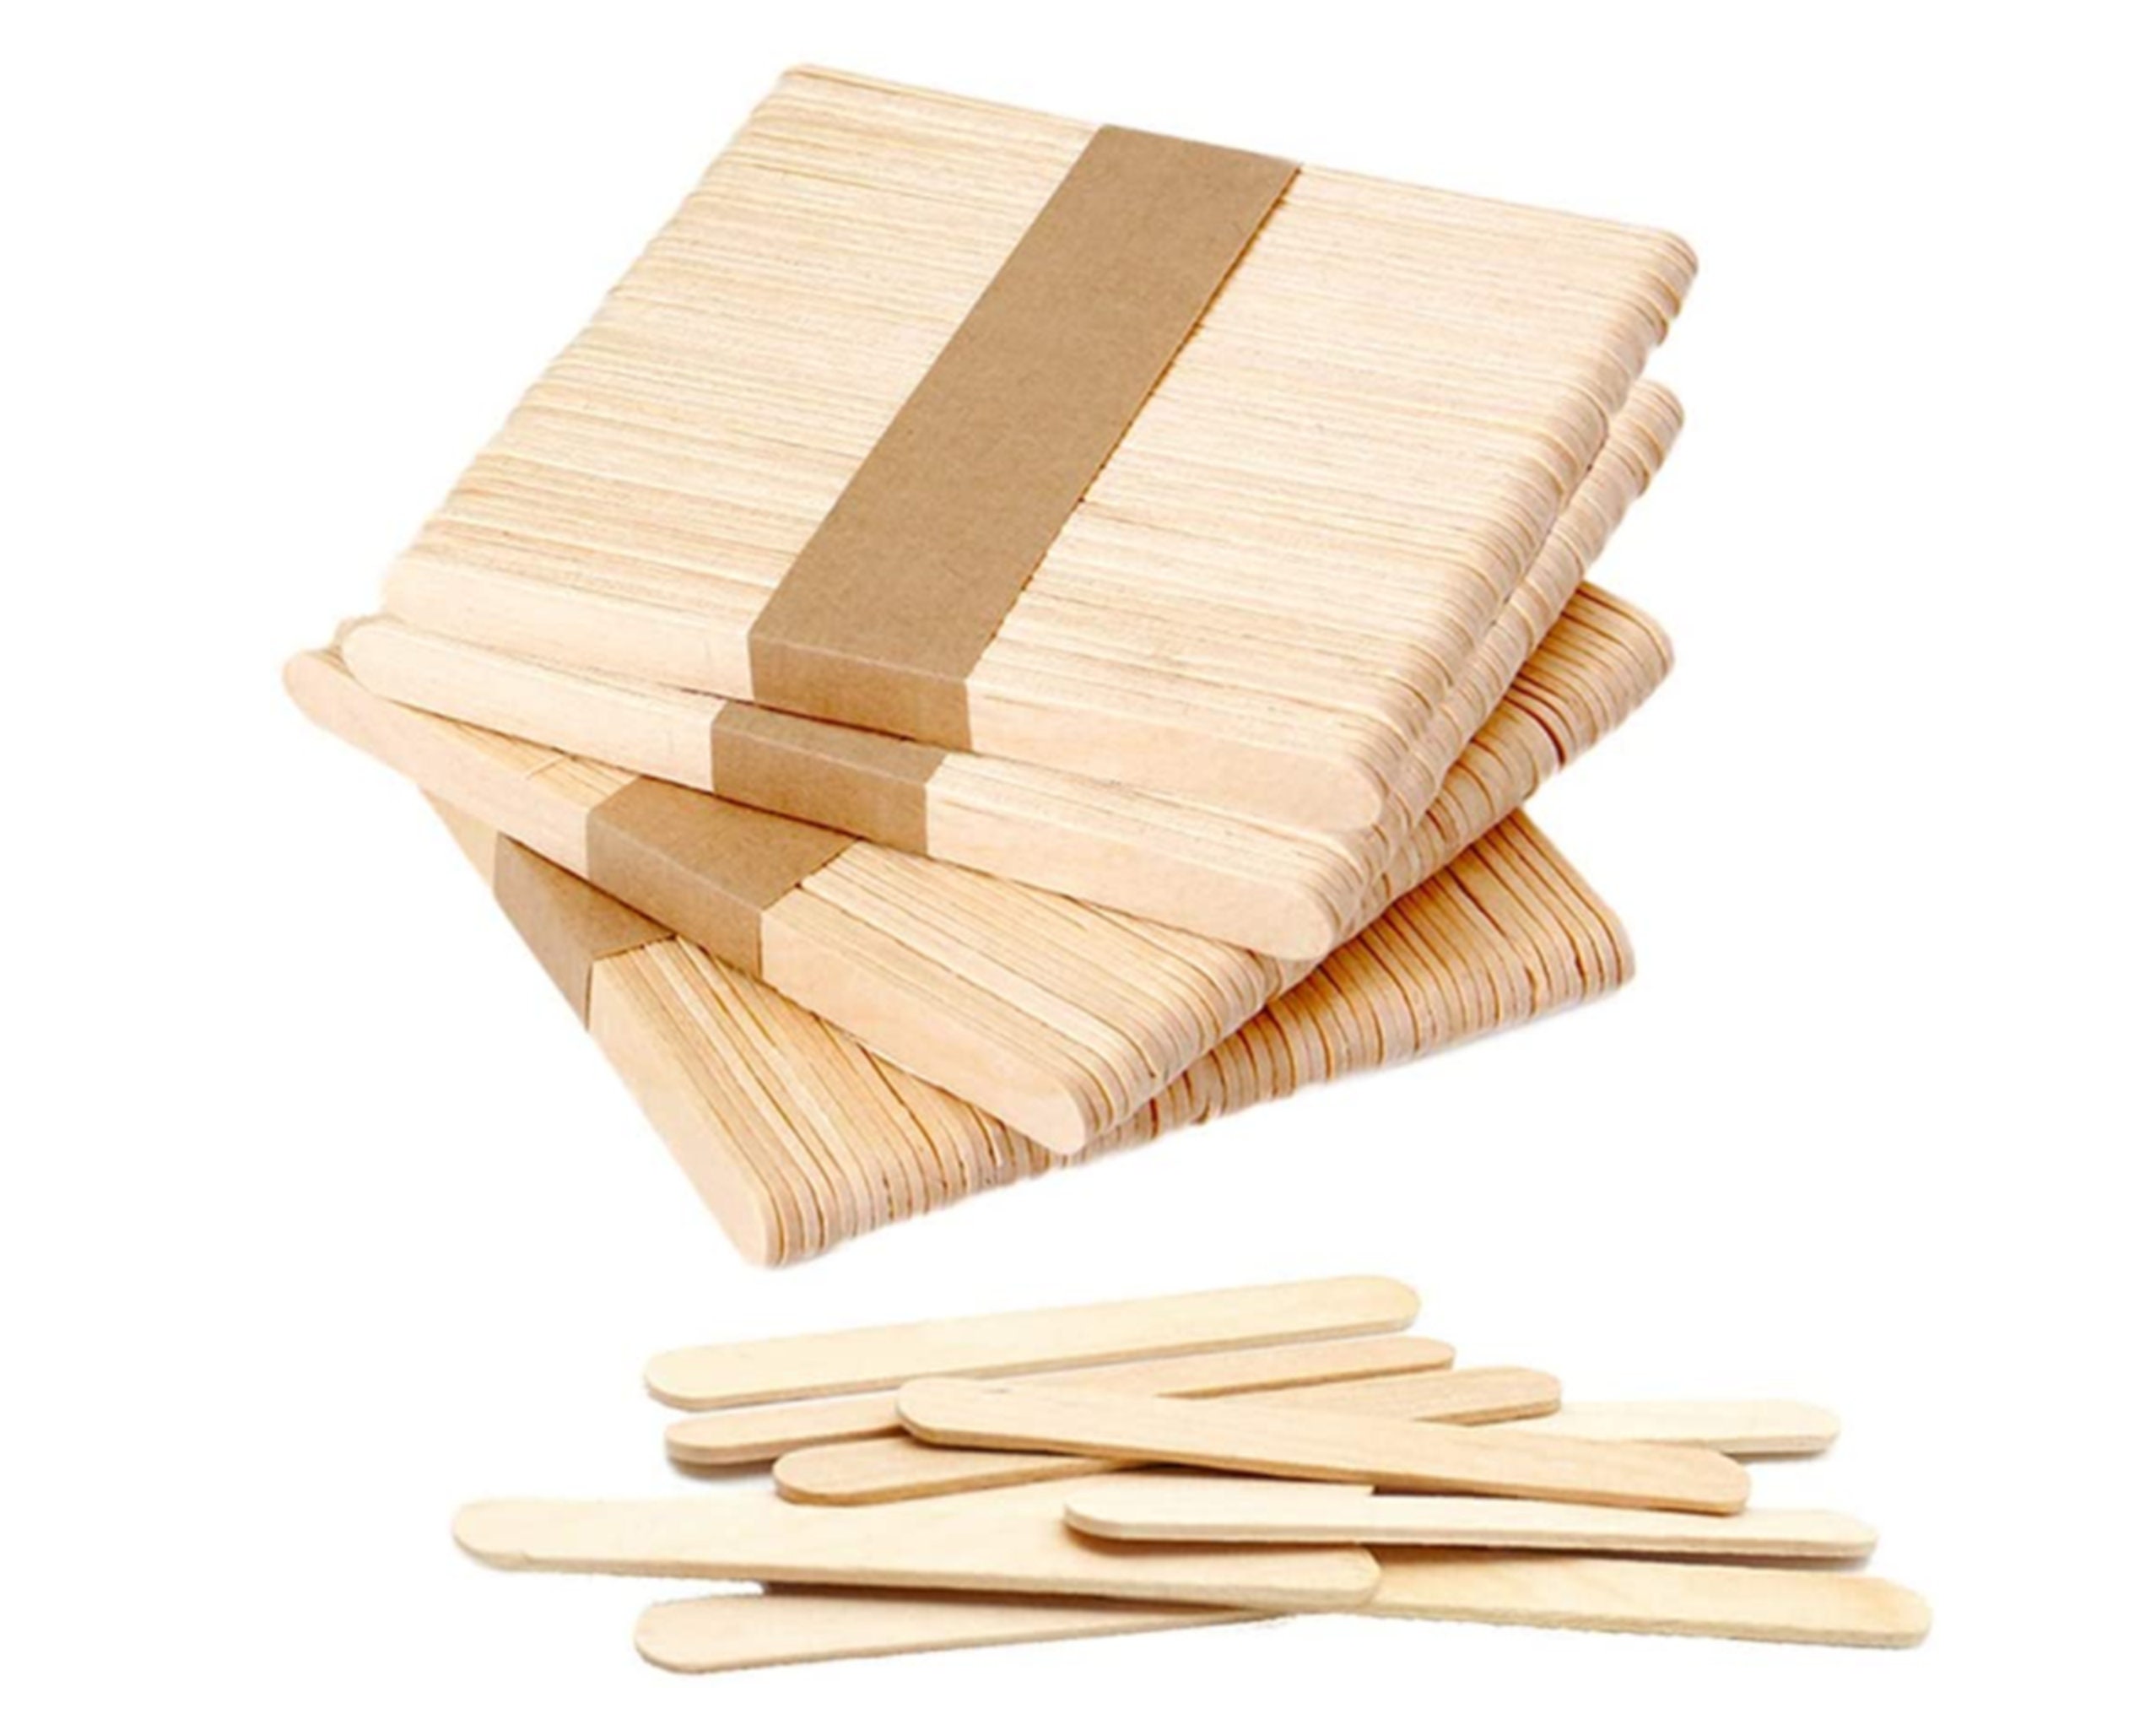  200 pcs Jumbo Wooden Craft Sticks Pack - Bulk Popsicle Sticks  for Arts & Crafts Projects, Holiday Ornament Crafting, Ice Cream, Waxing :  Arts, Crafts & Sewing